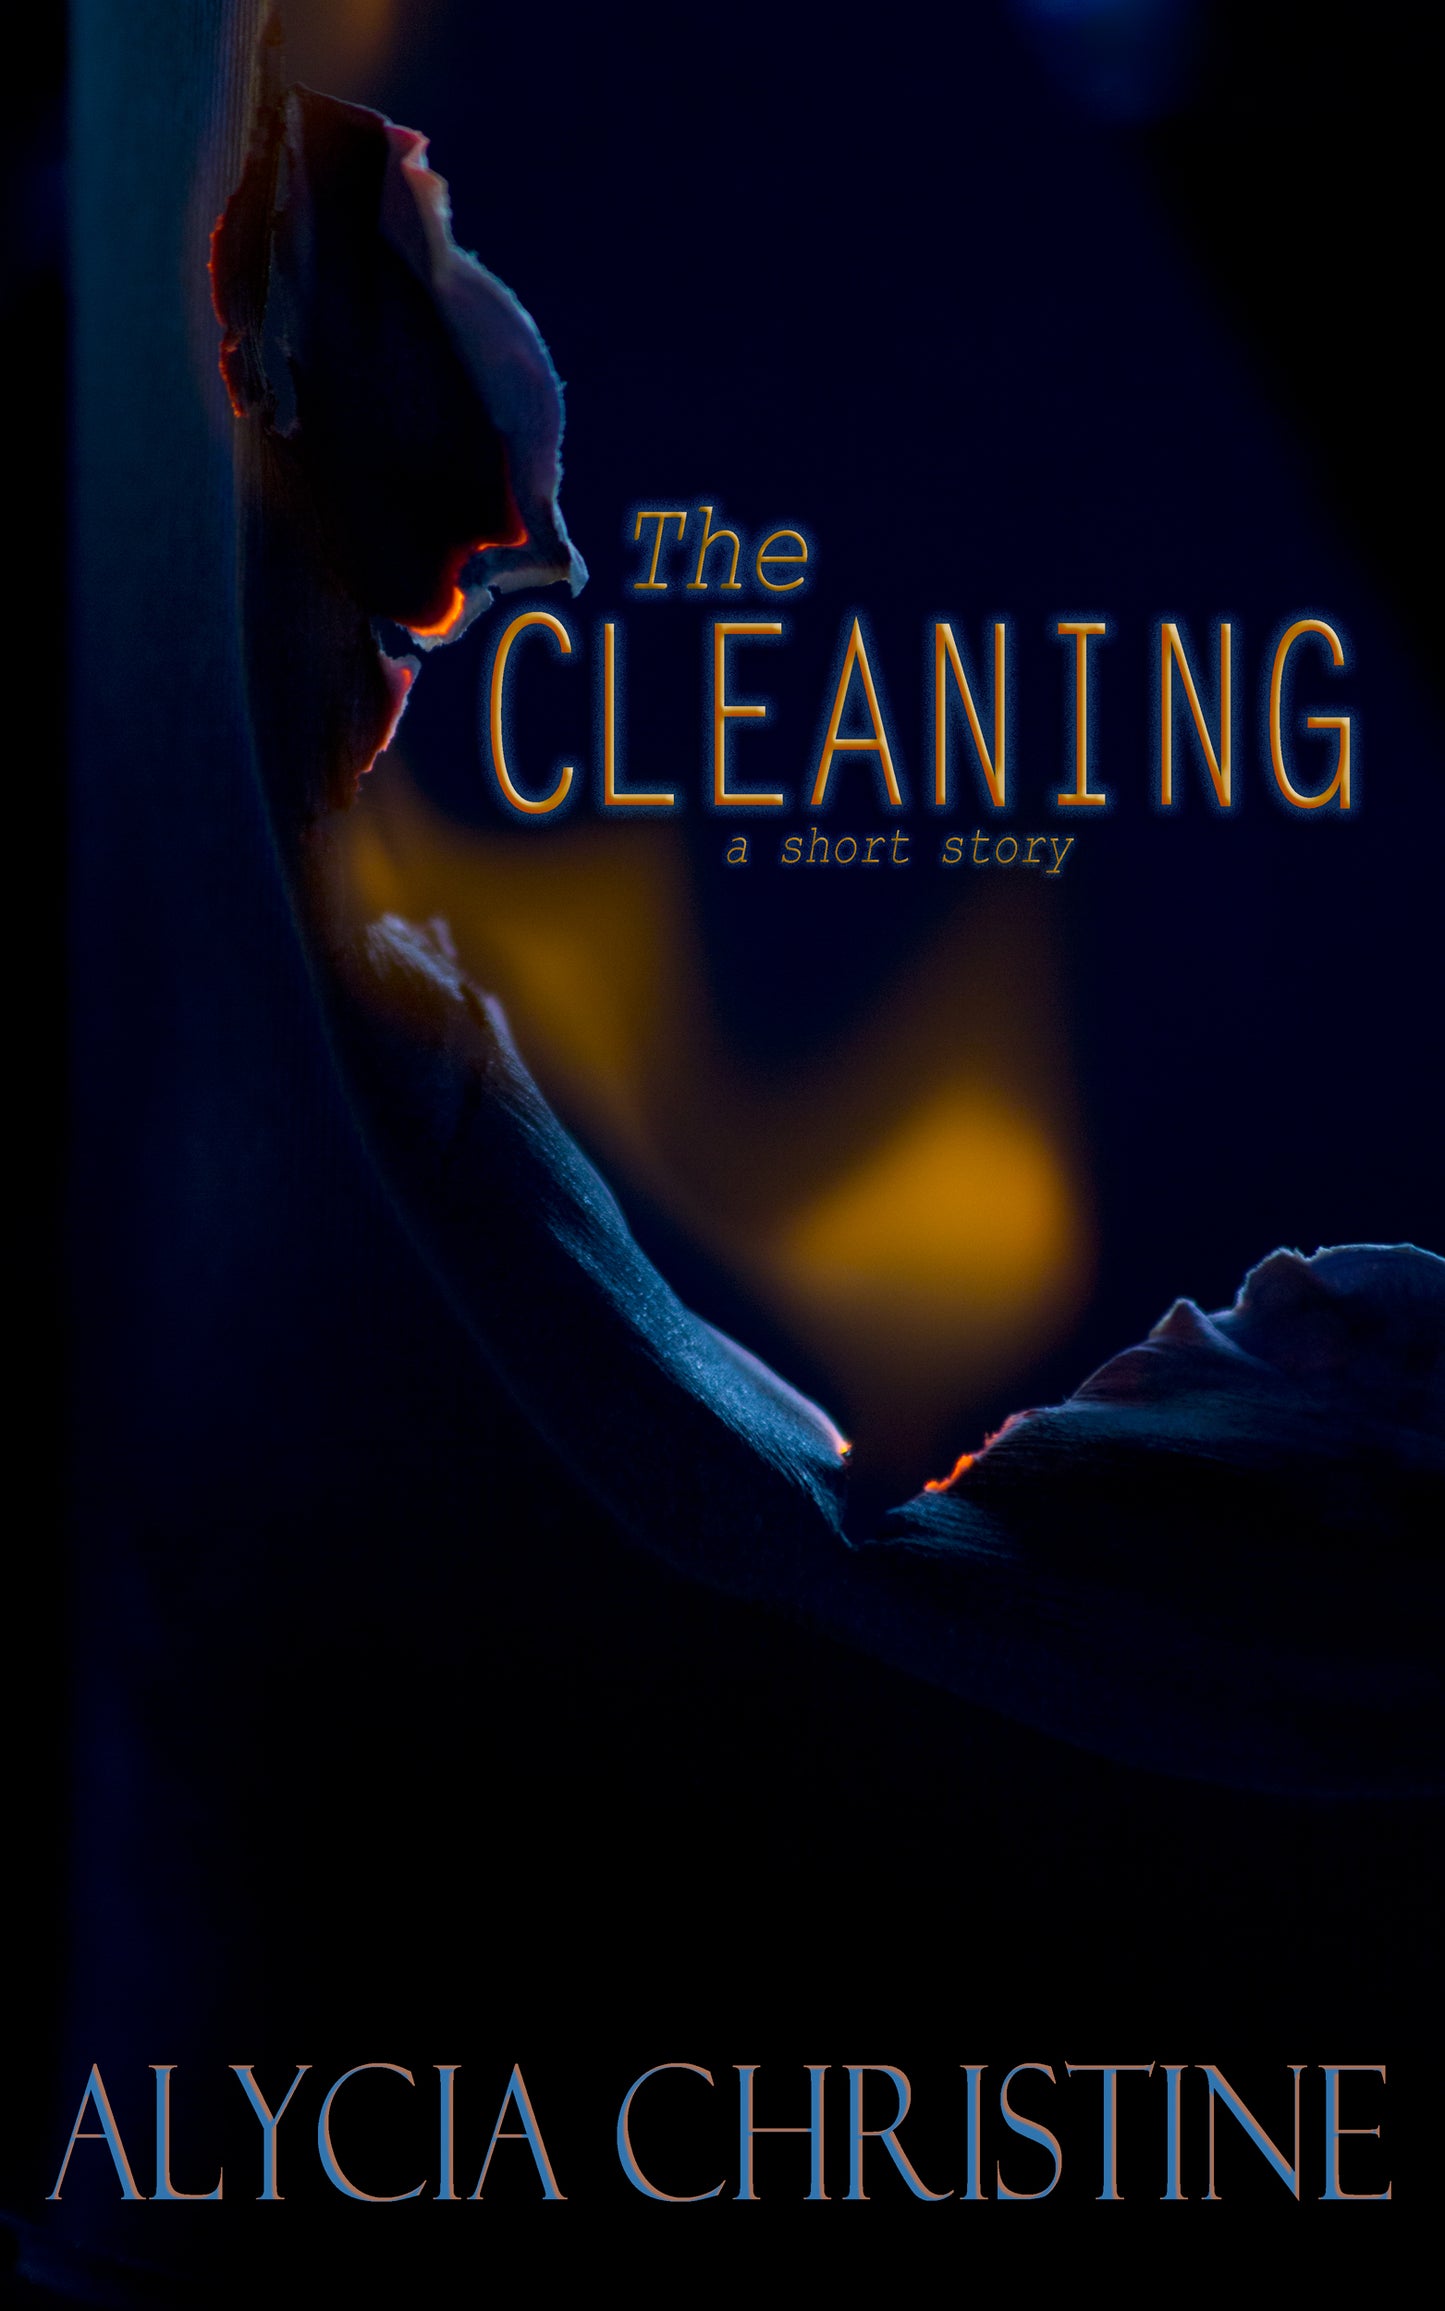 The Cleaning Short Story